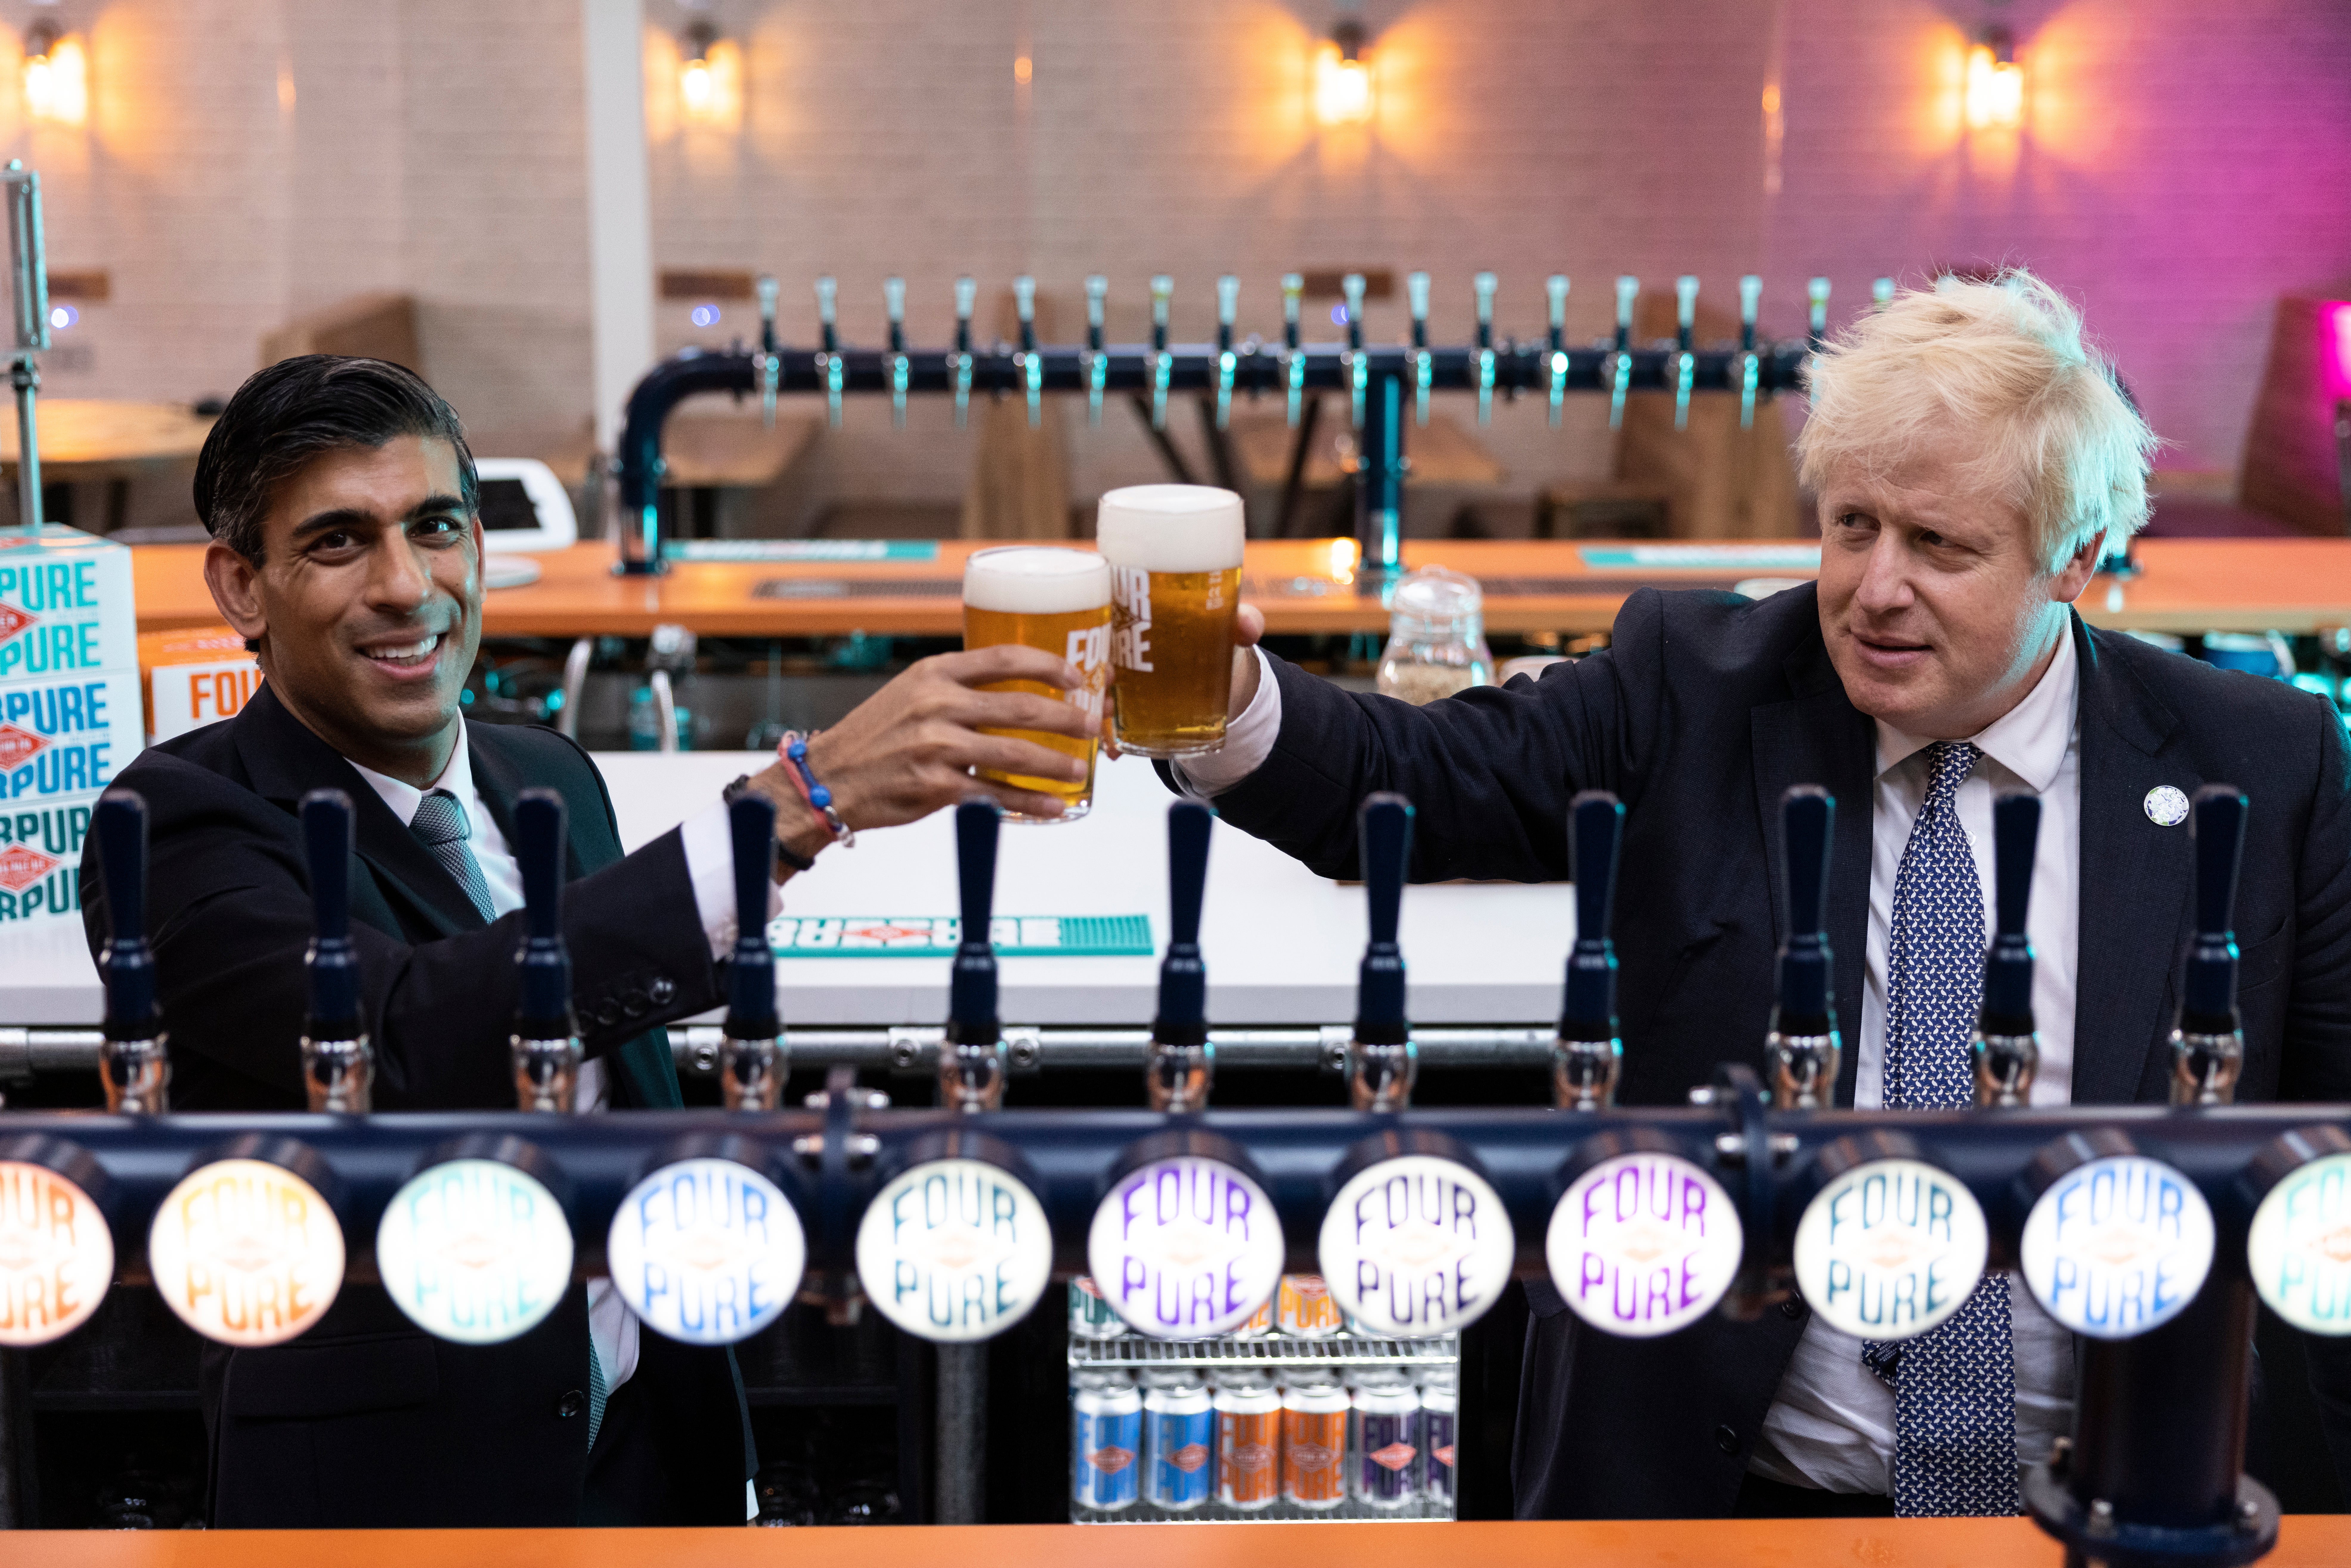 Boris Johnson and Rishi Sunak visit the Fourpure Brewery in Bermondsey, south London, after the chancellor’s Budget